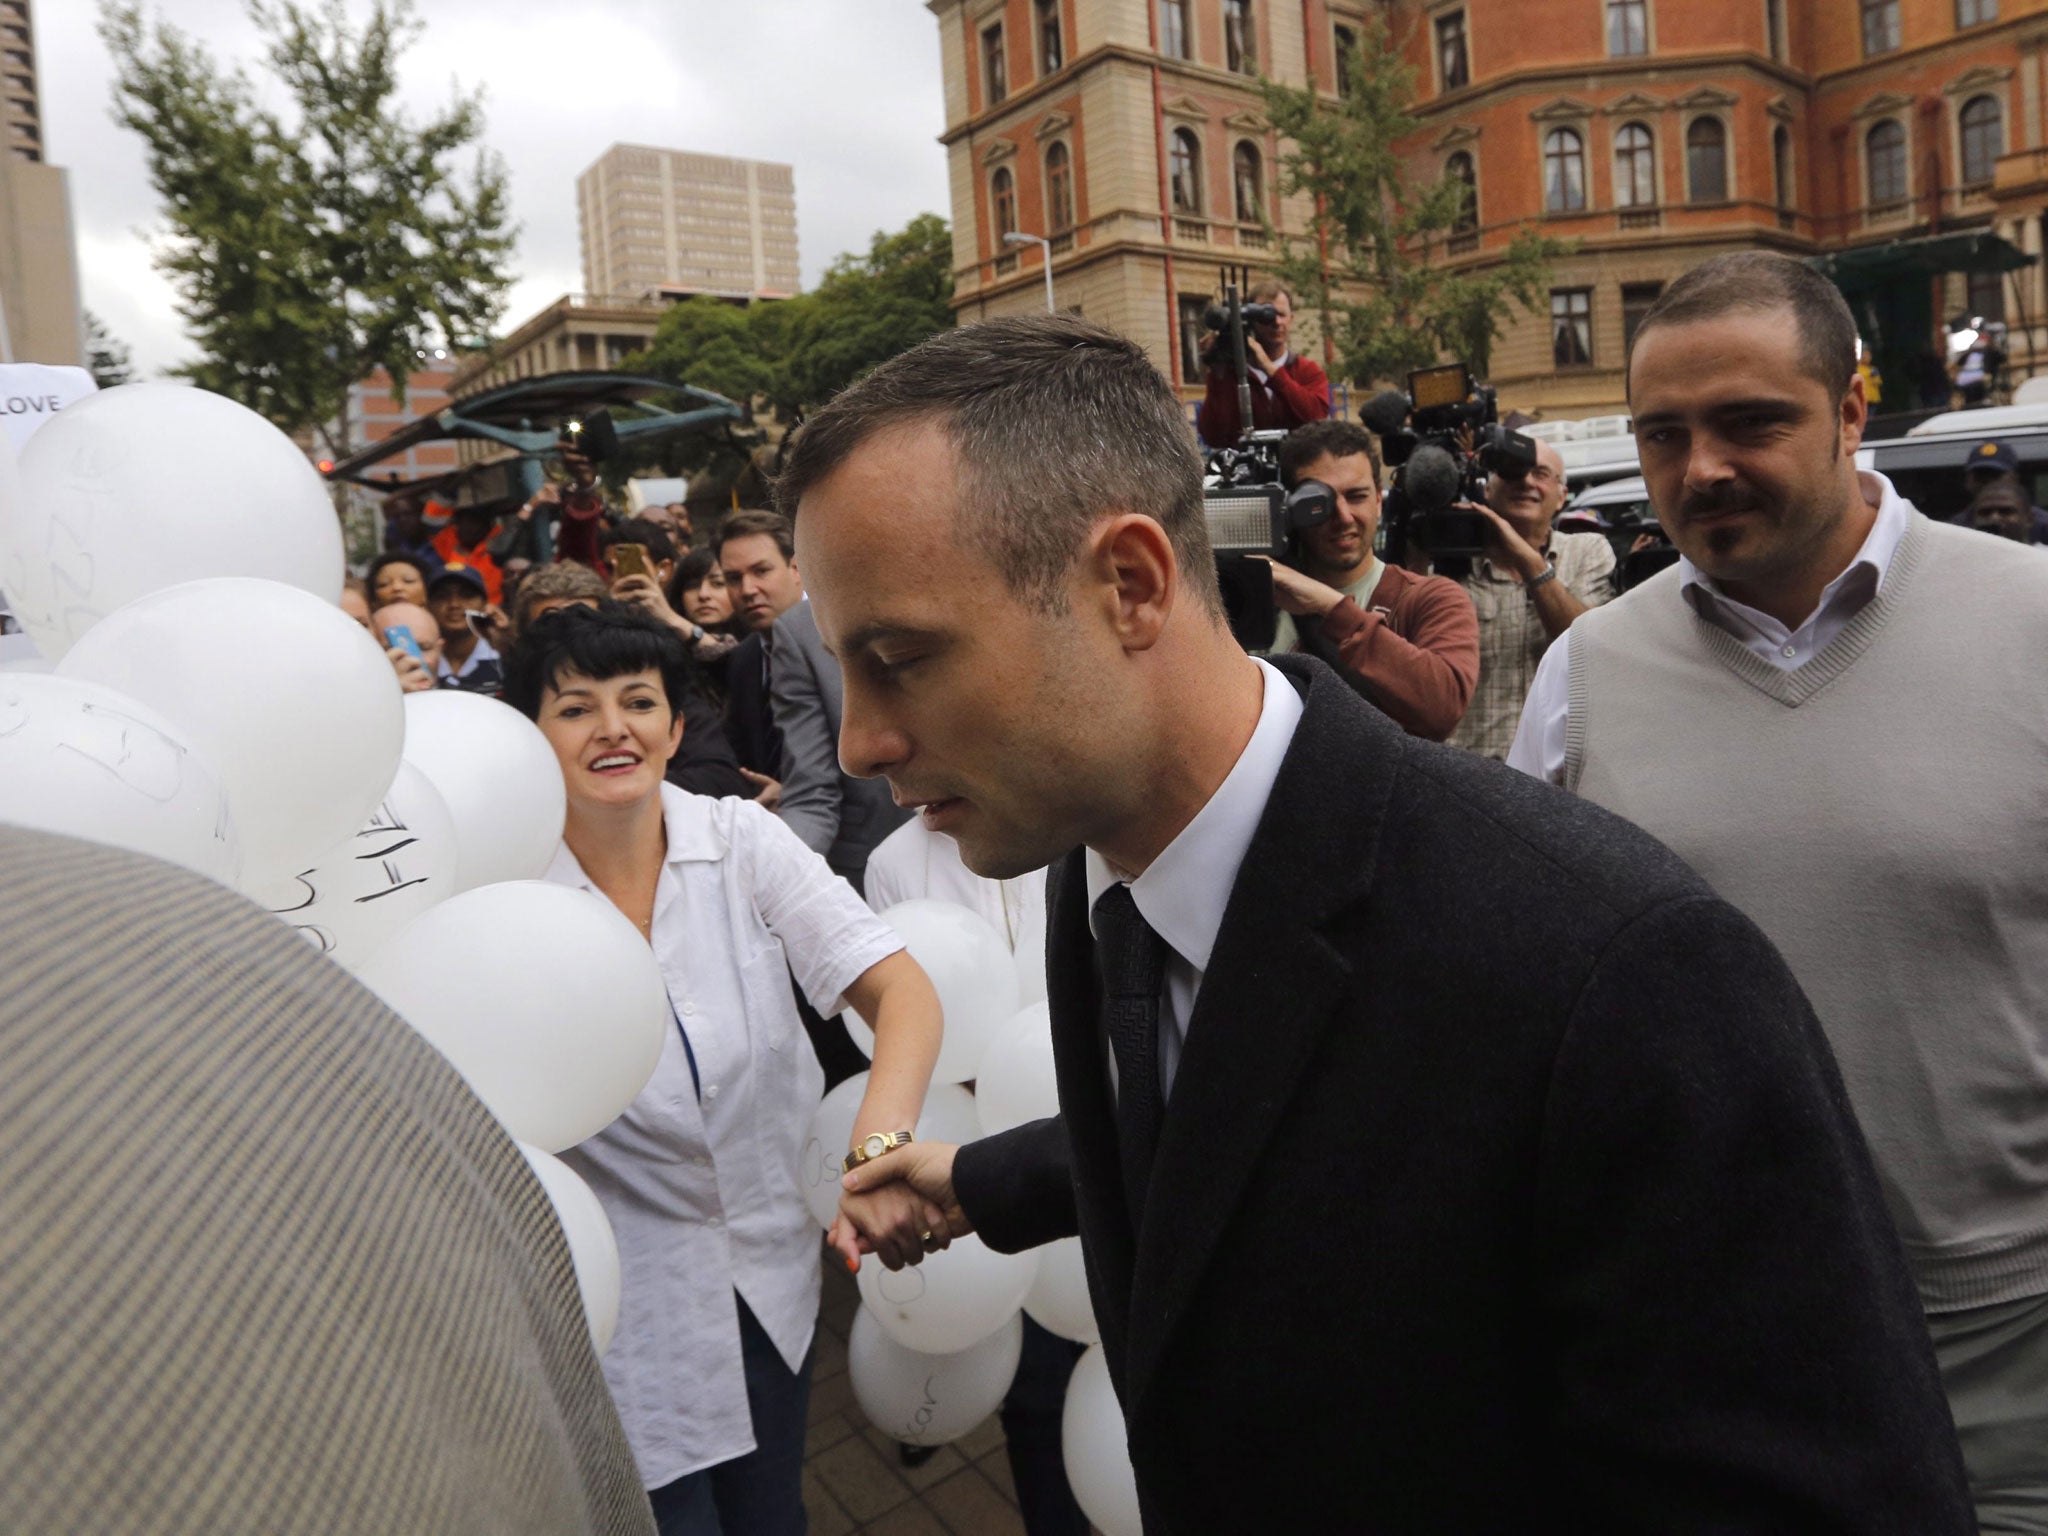 Oscar Pistorius holds hand of his supporter as he arrives at court in Pretoria  